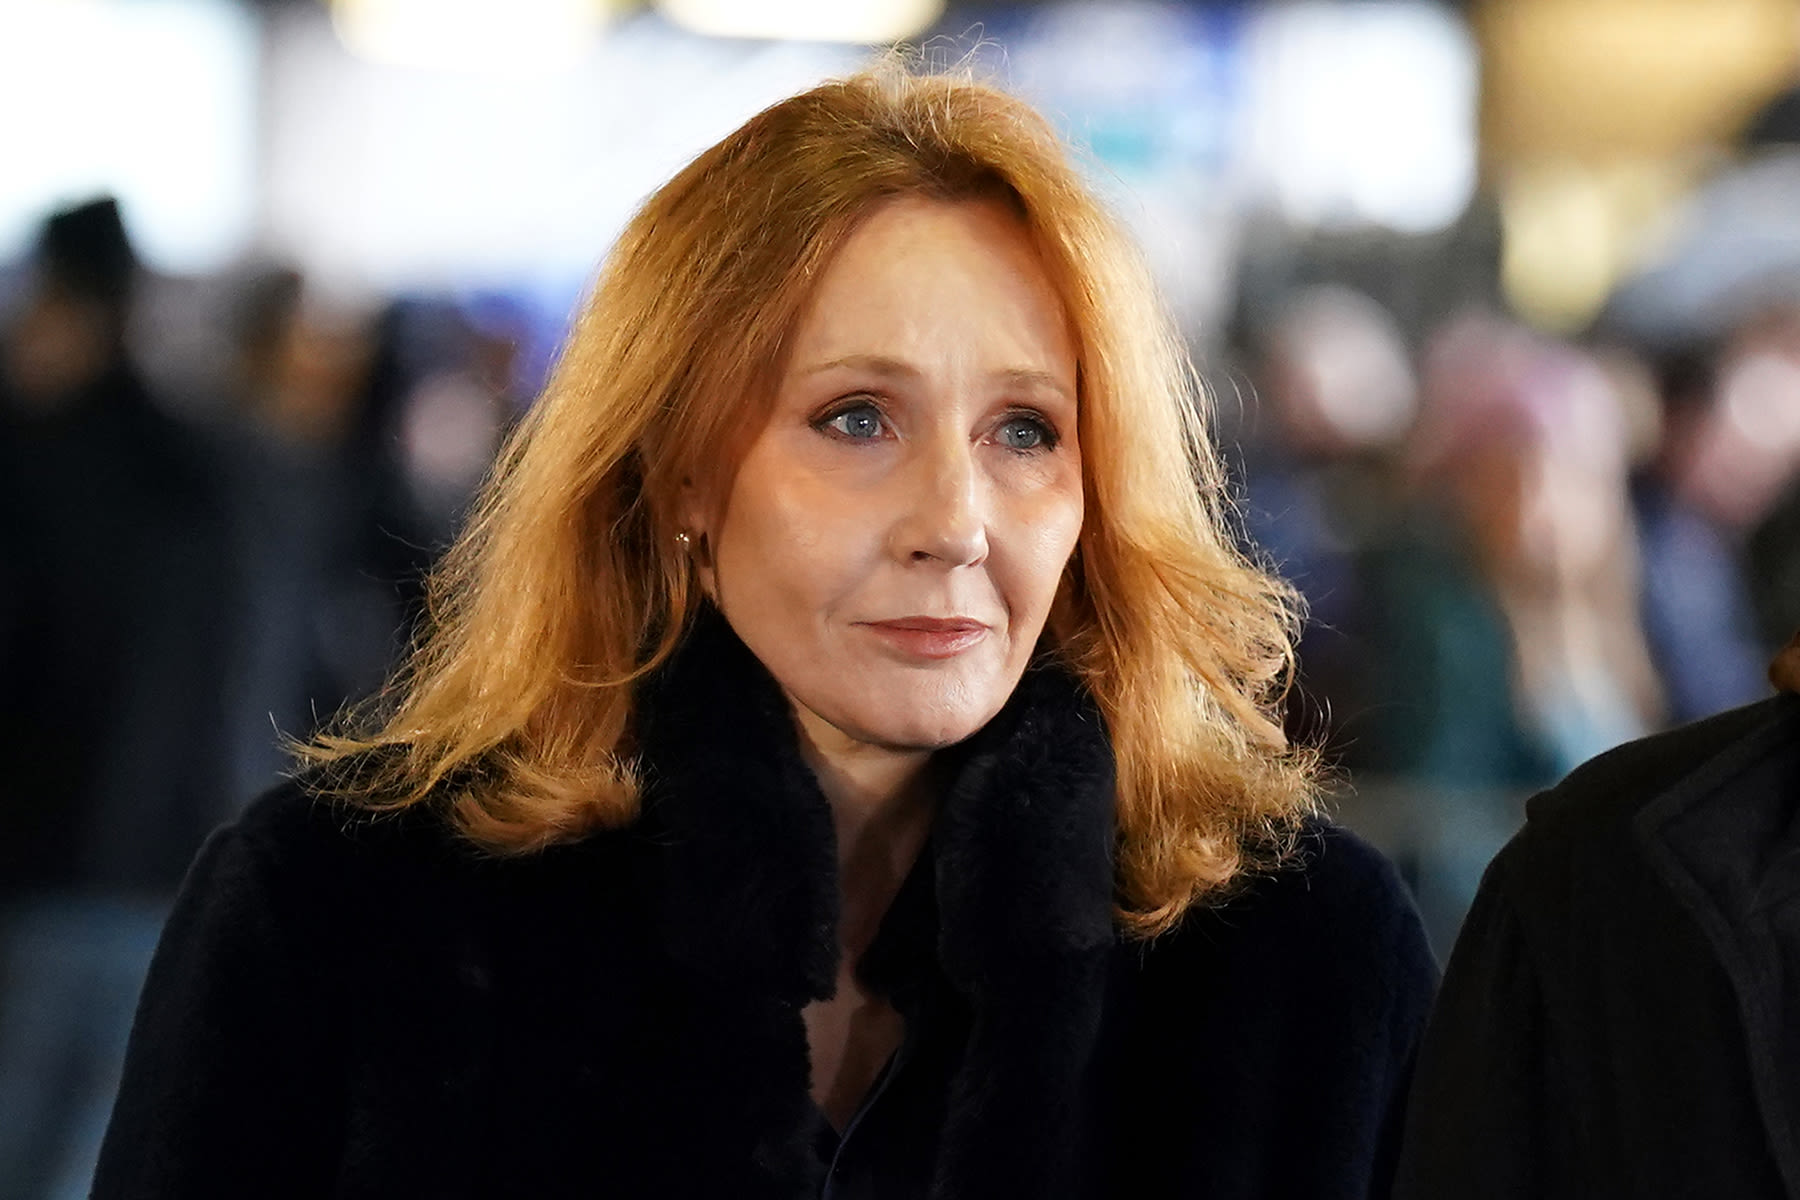 J.K. Rowling Used to Want to Debate Gender. Now She Just Insults Trans People